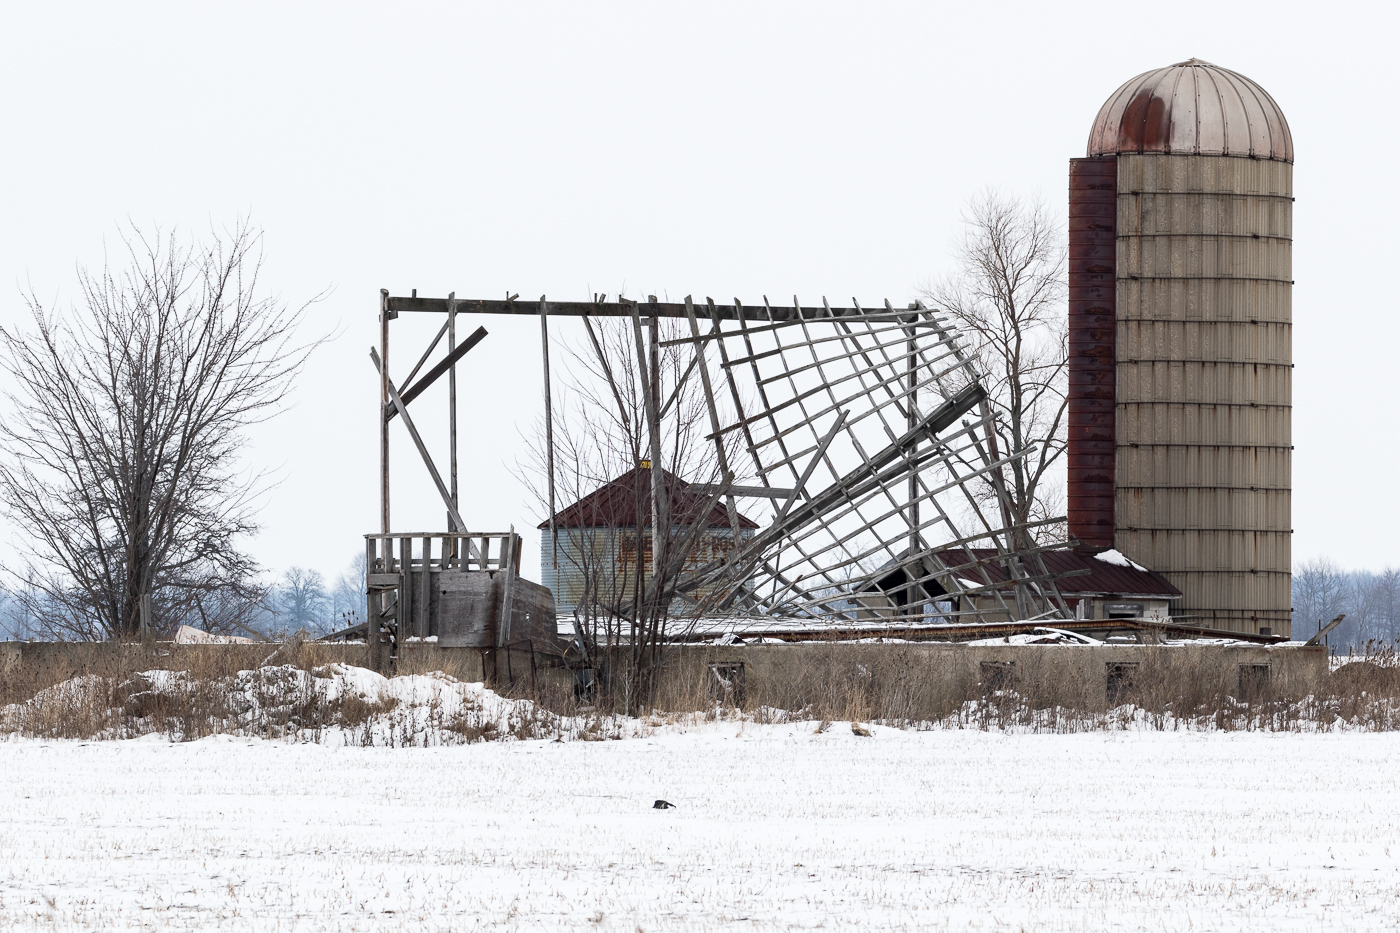 Silo with Damaged Buildings